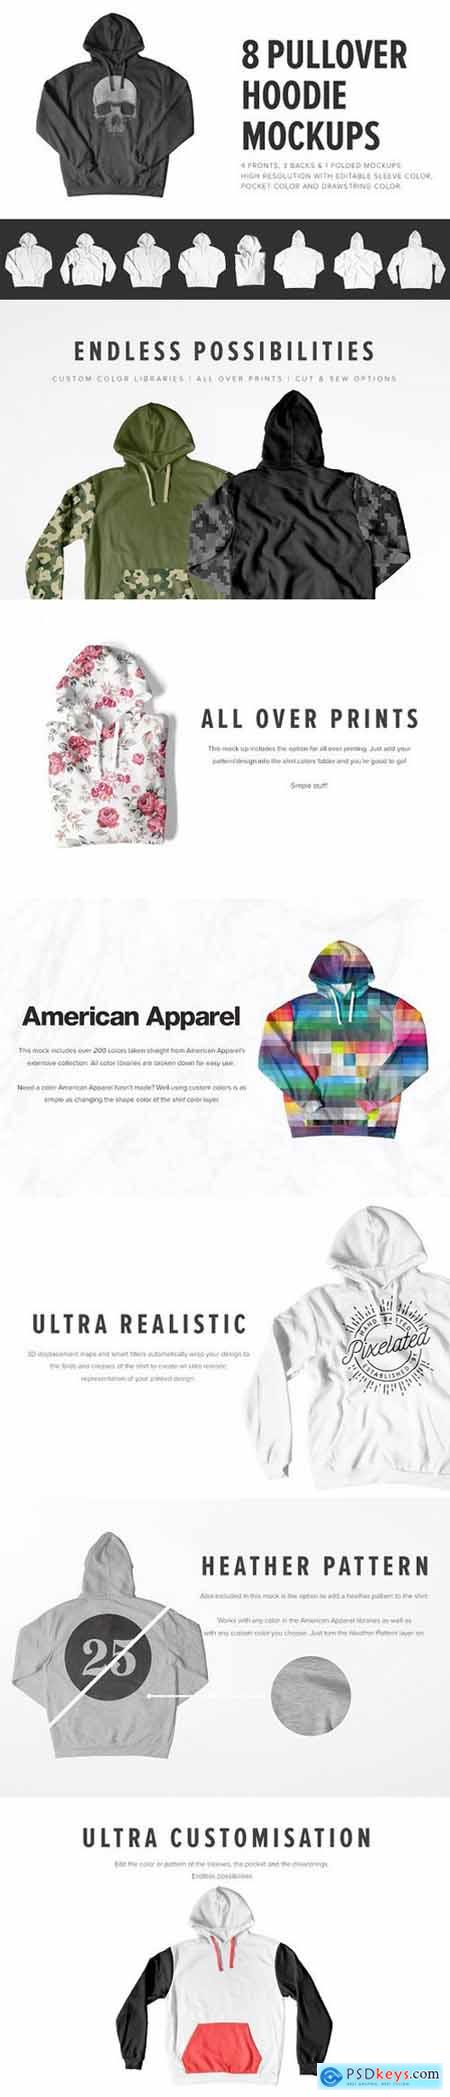 Apparel » page 19 » Free Download Photoshop Vector Stock image Via ...